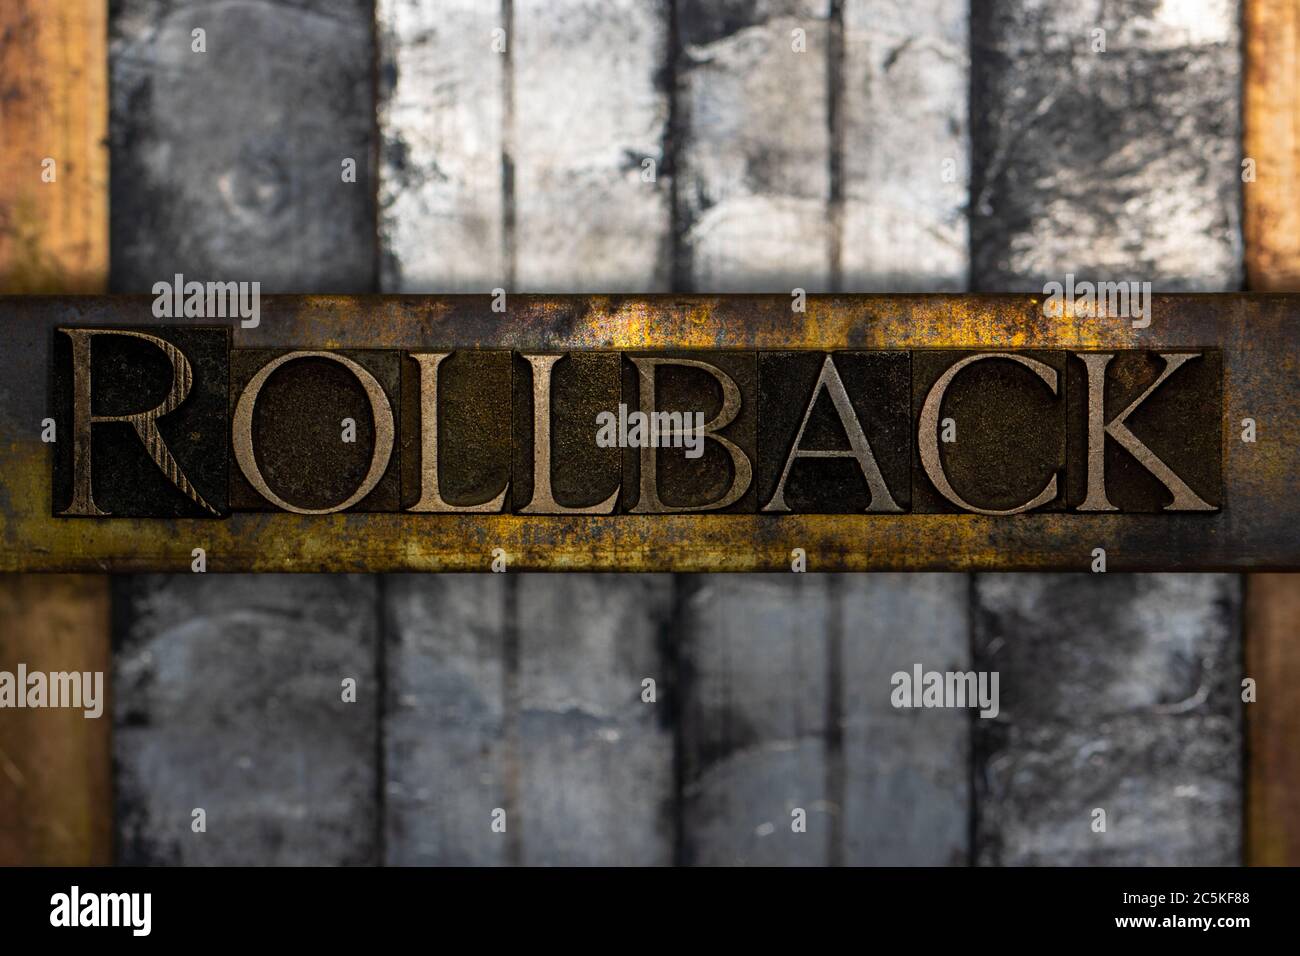 Rollback text formed with real authentic typeset letters on vintage textured silver grunge copper and gold background Stock Photo